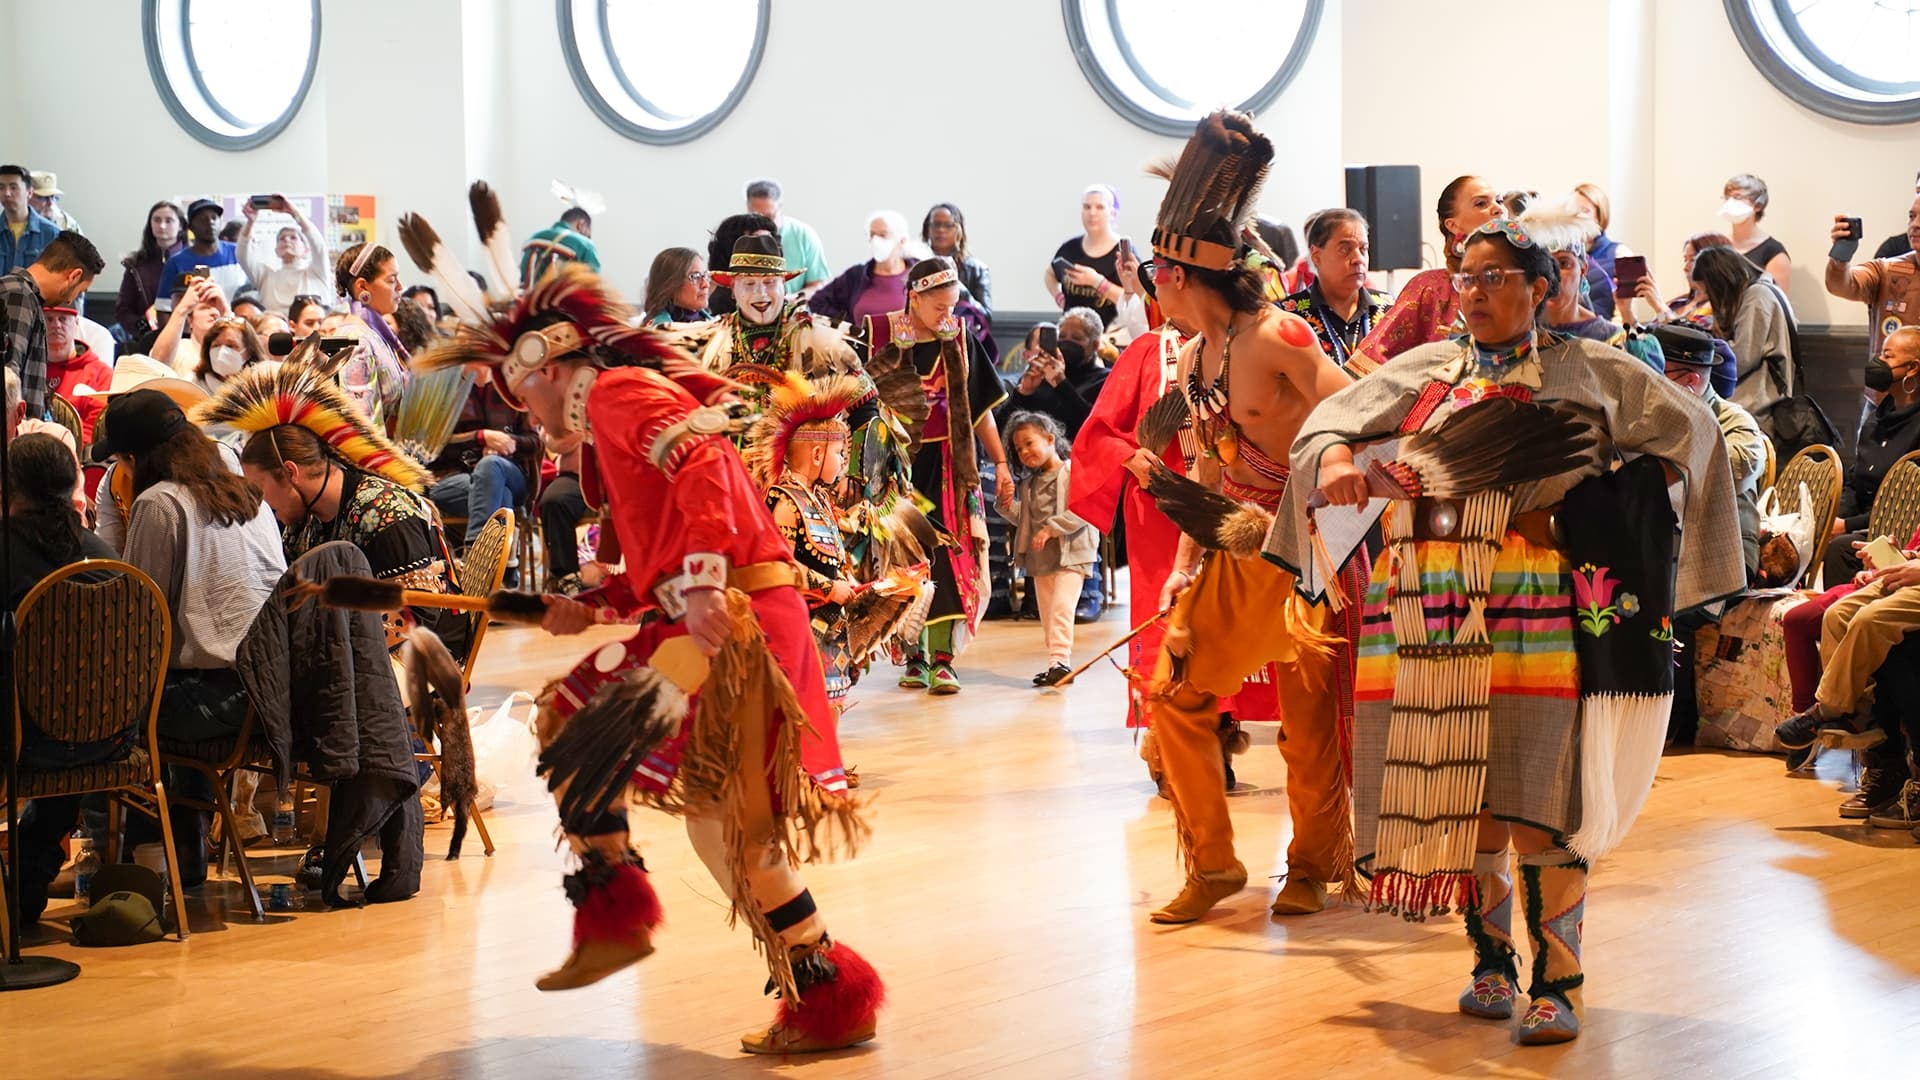 Native Americans dance at UMD Pow Wow